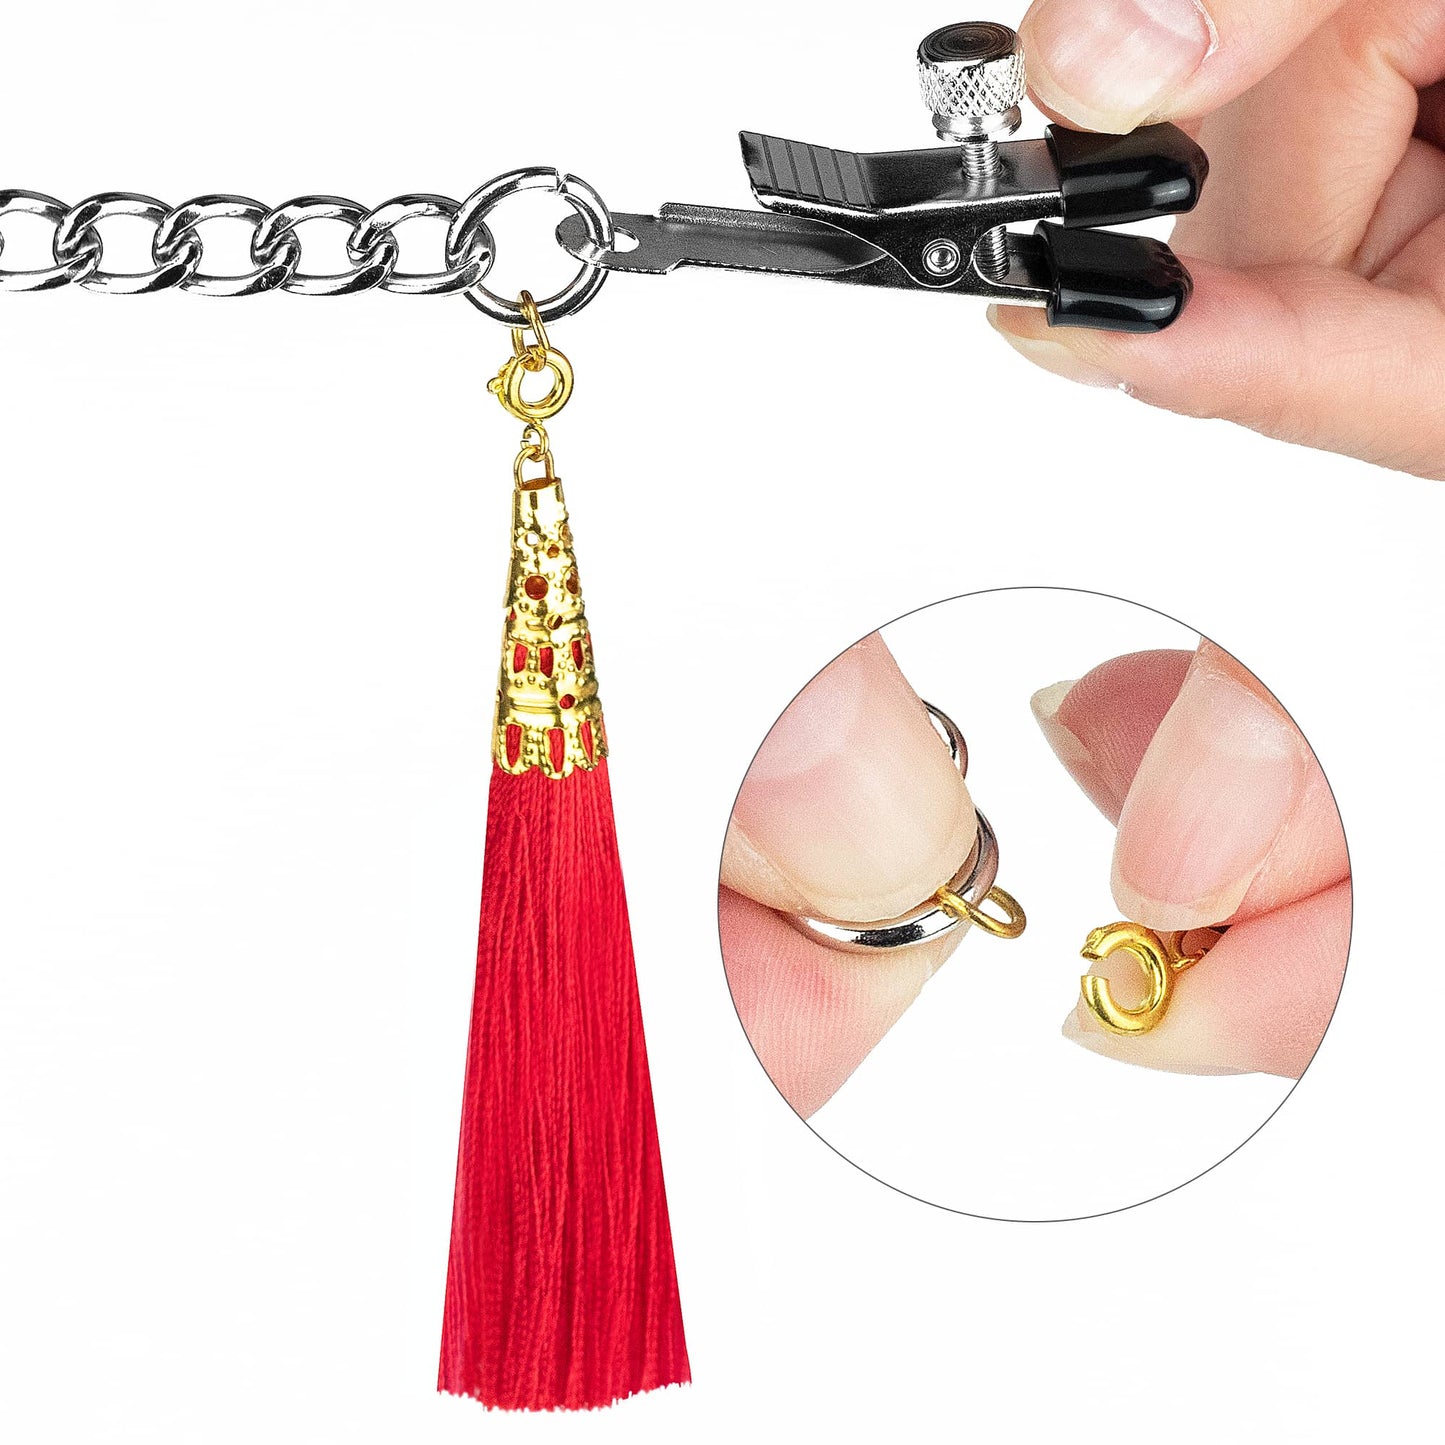 The removable tassels of the nipple clit tassel clamp with chain 